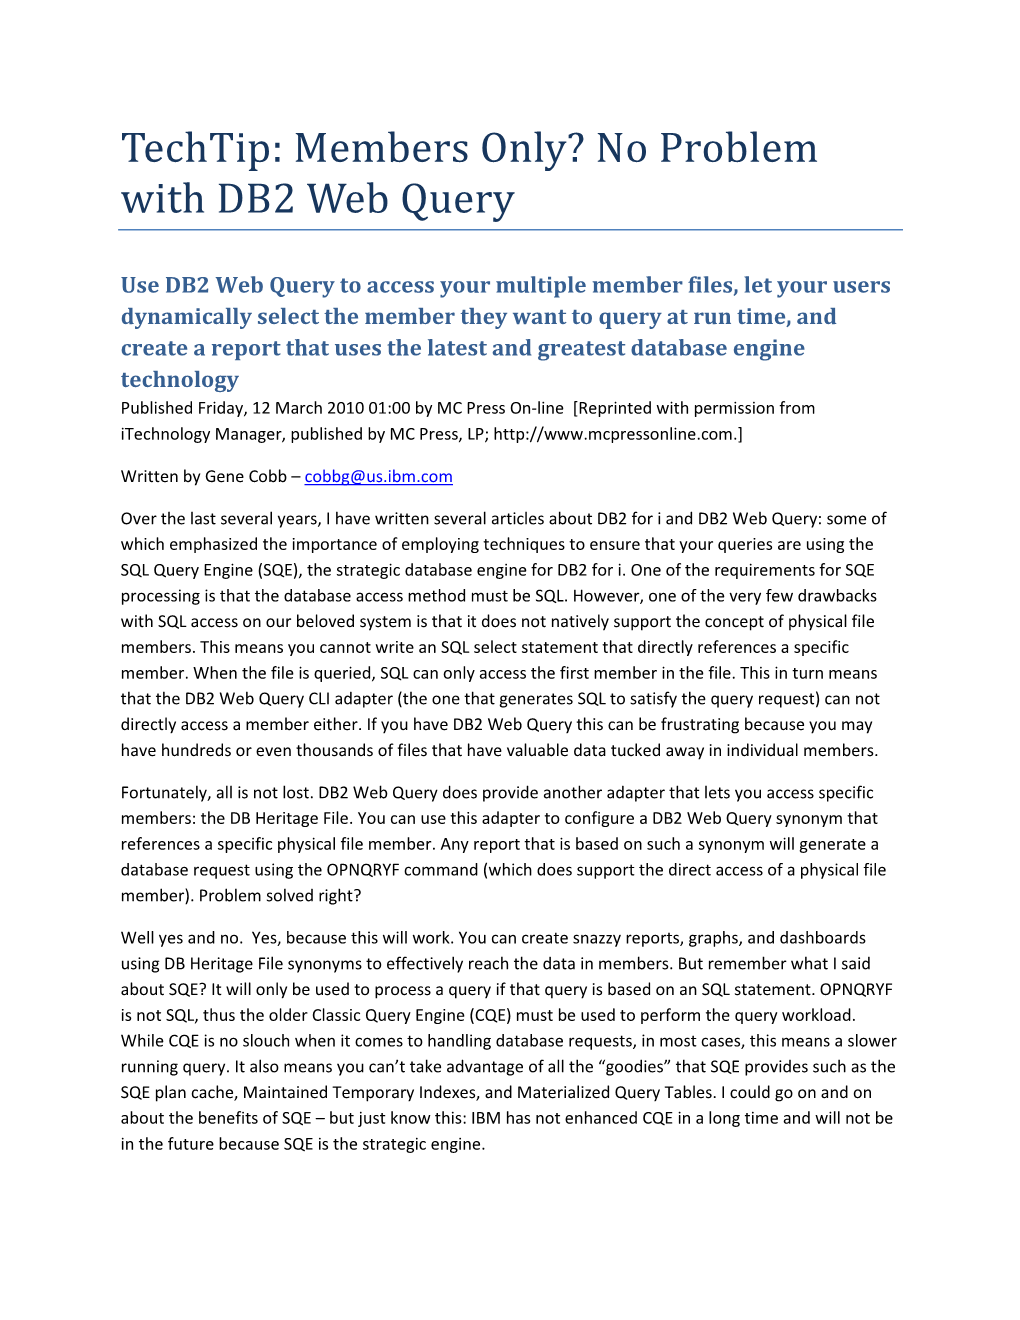 Techtip: Members Only? No Problem with DB2 Web Query